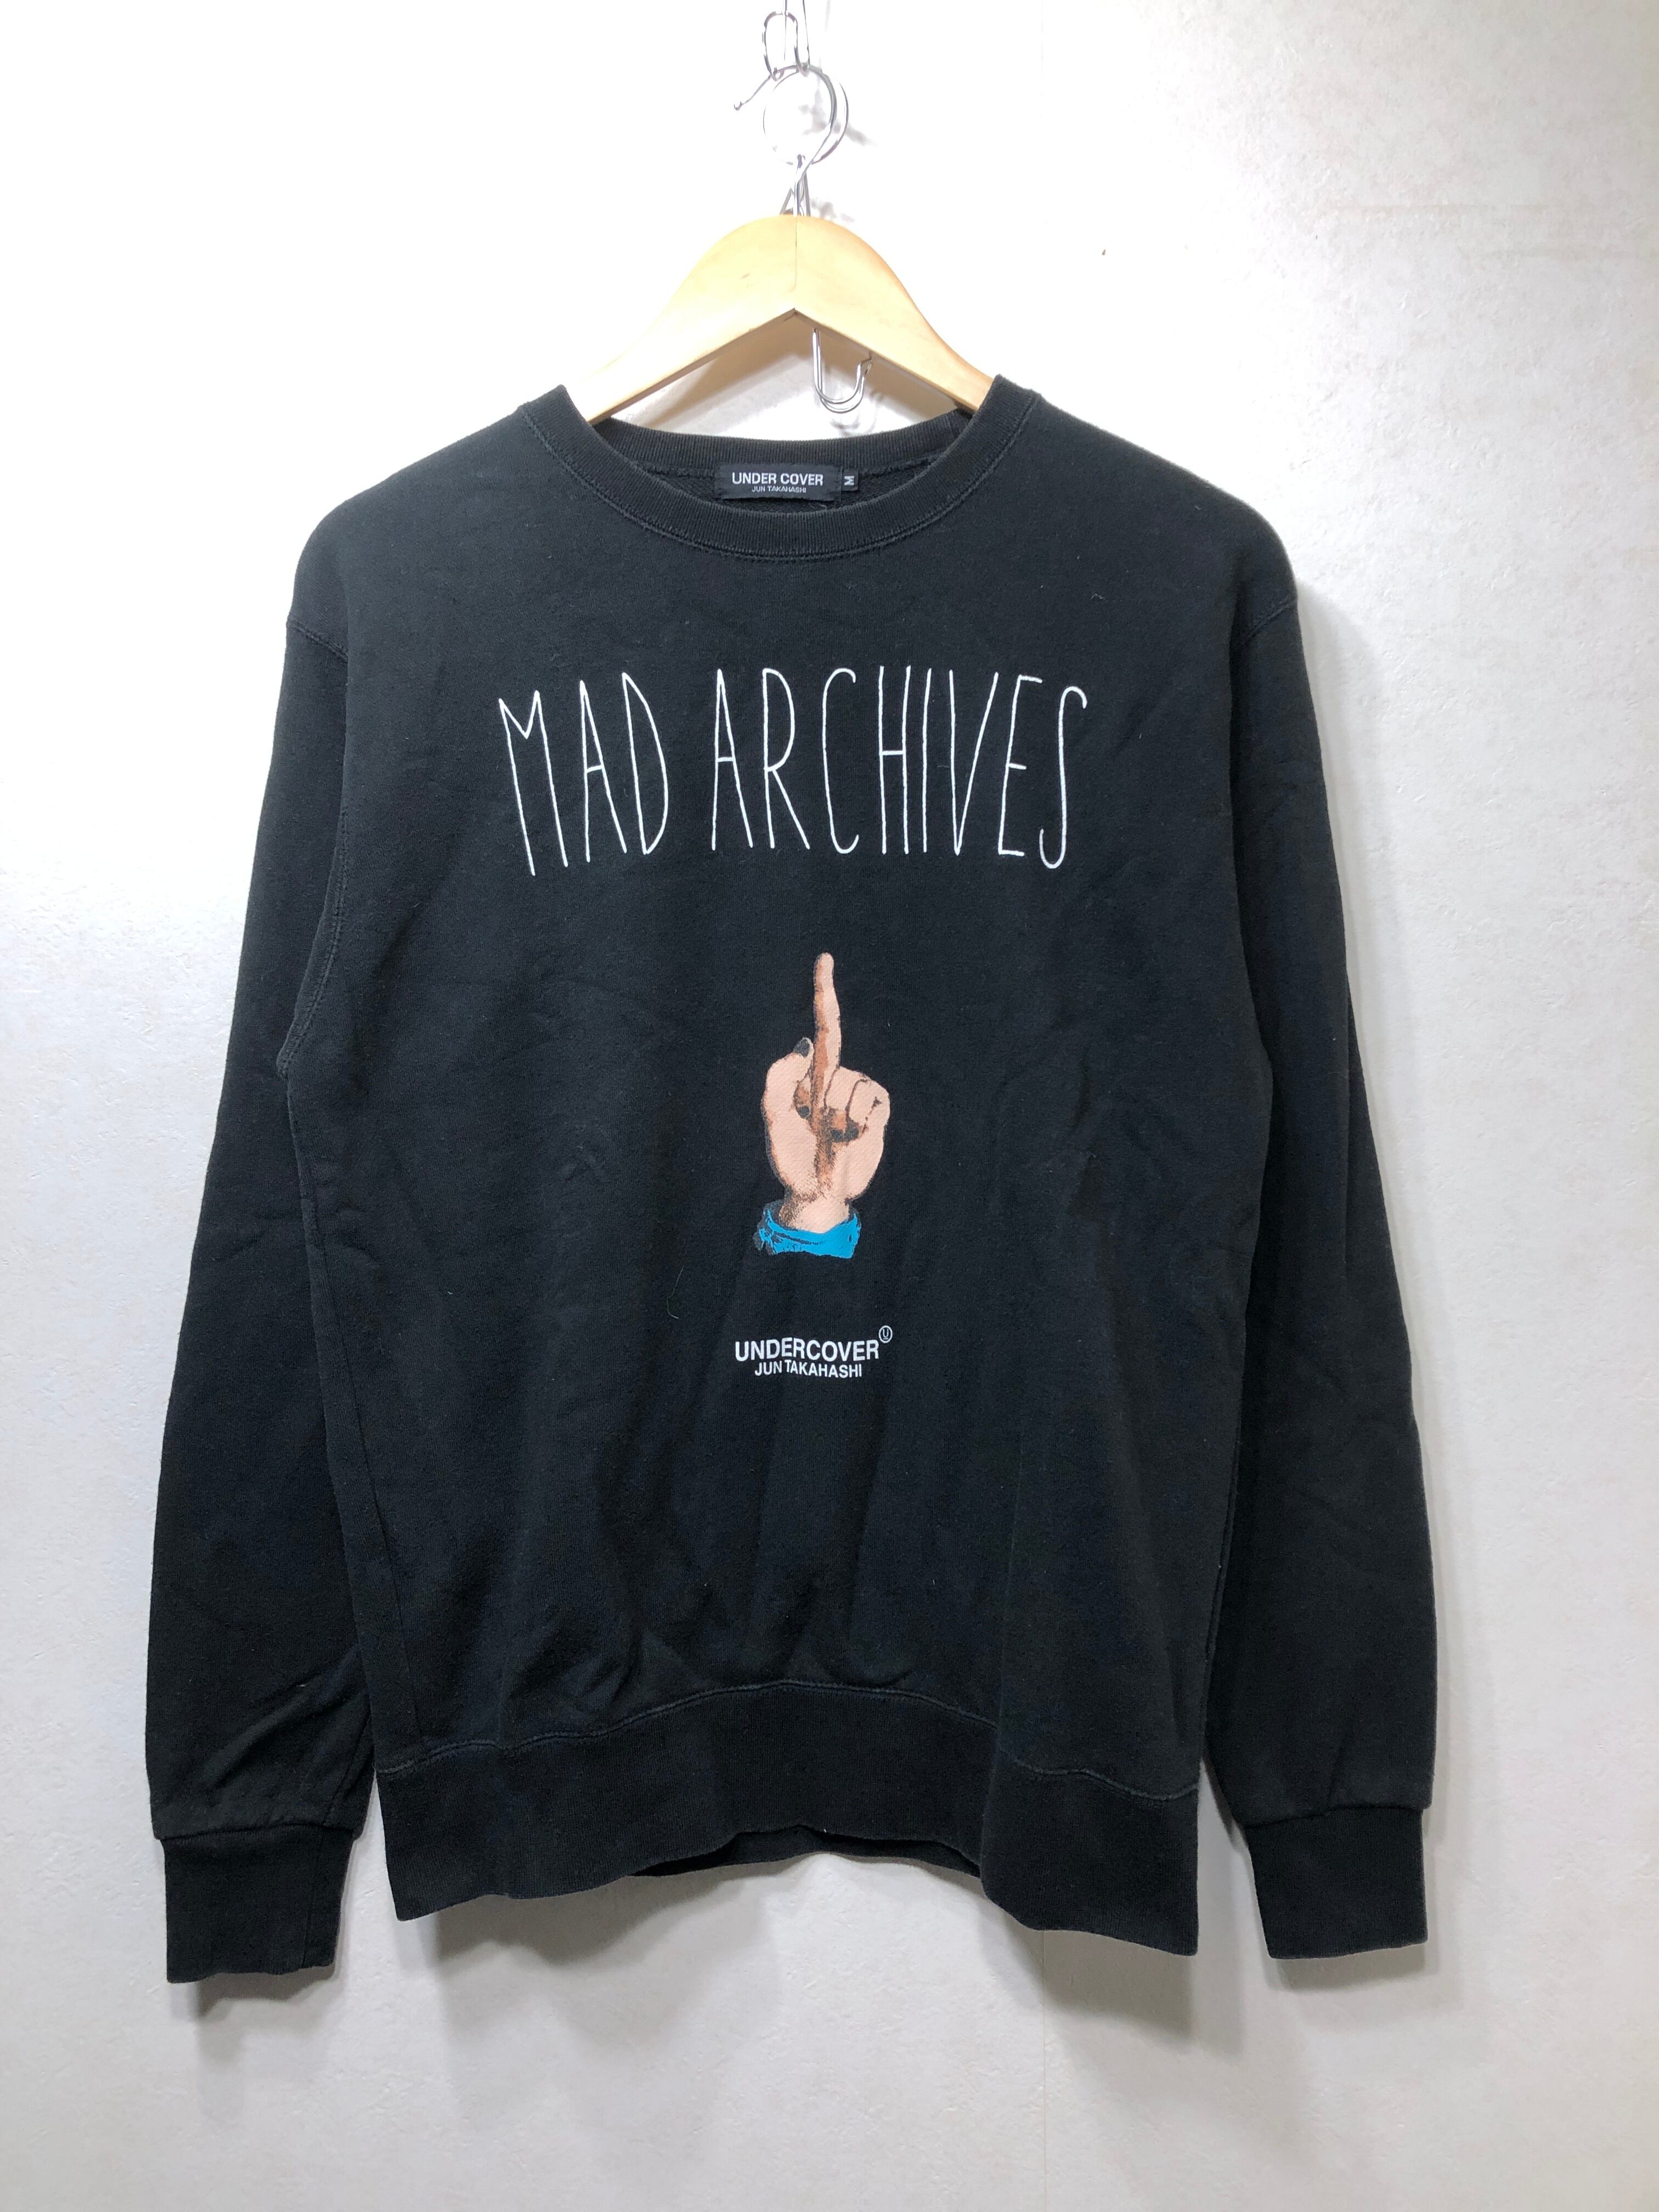 UNDER COVER mad archives スウェット